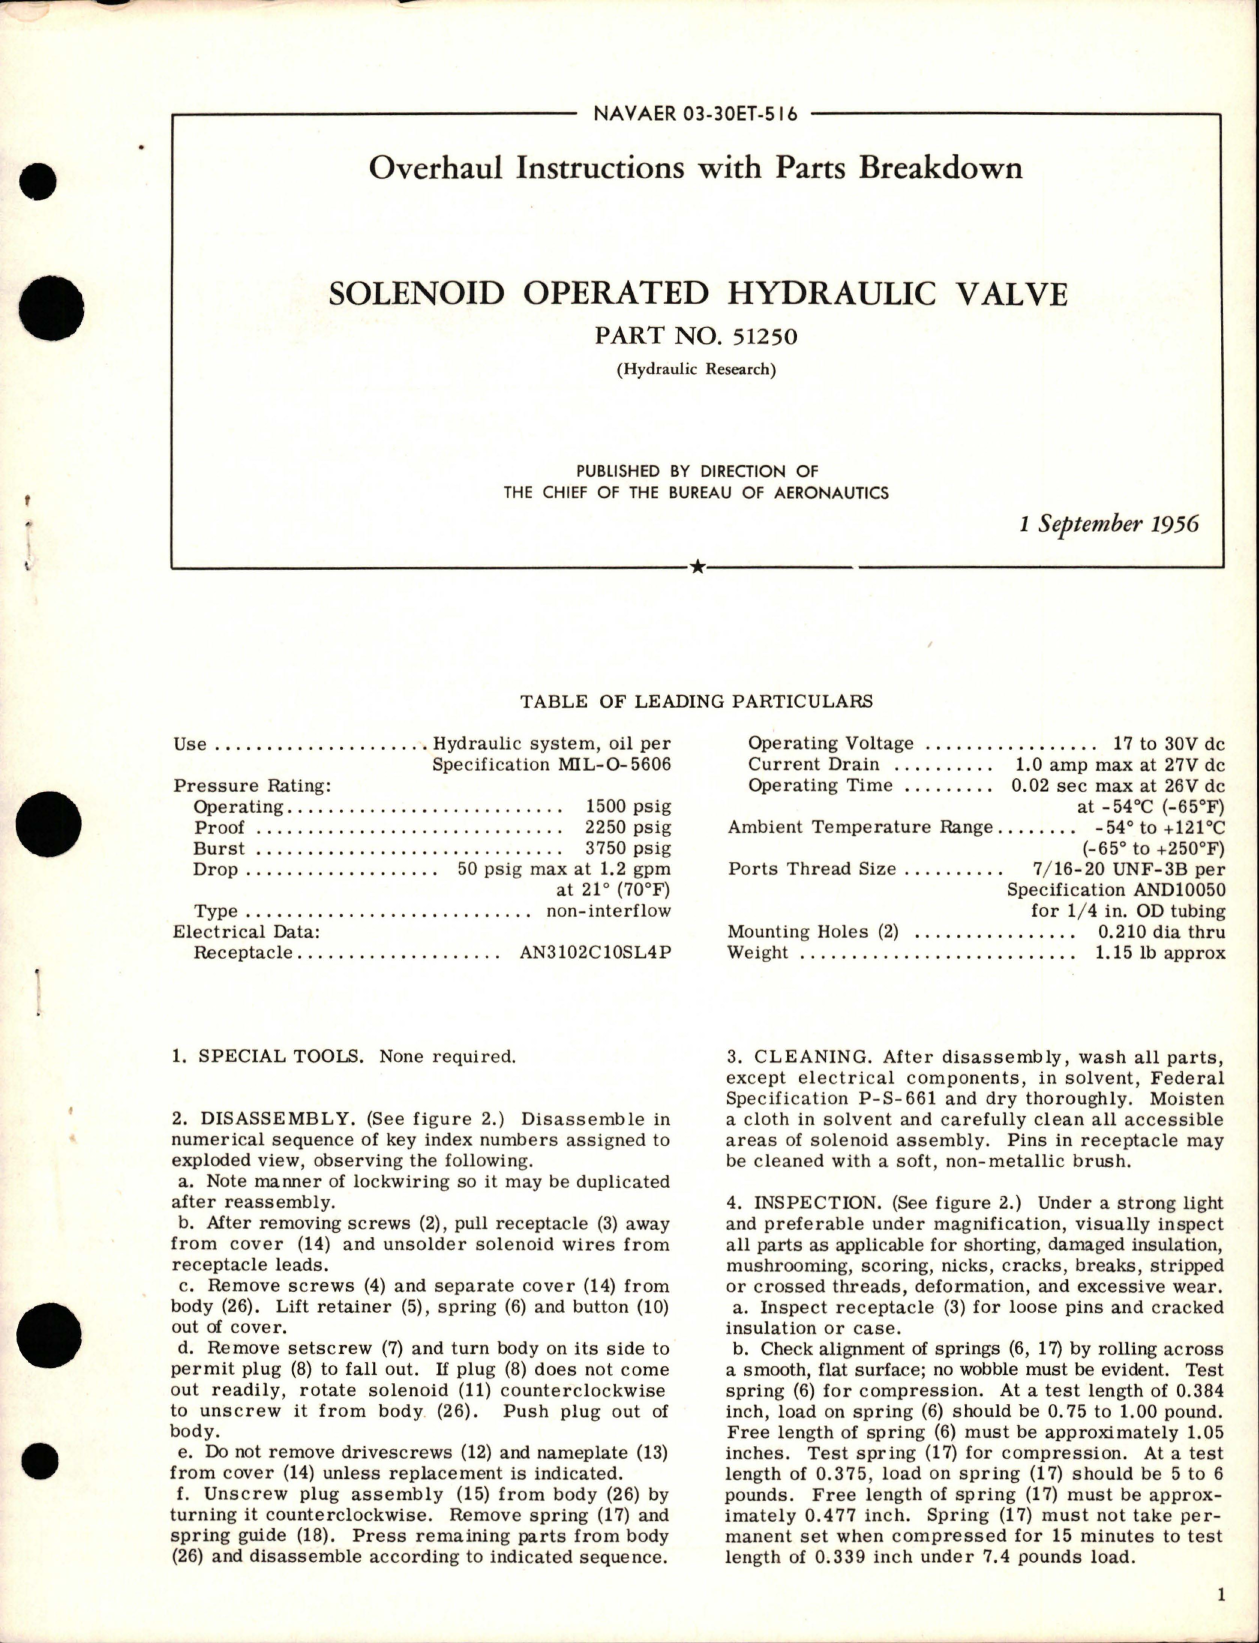 Sample page 1 from AirCorps Library document: Overhaul Instructions with Parts Breakdown for Solenoid Operated Hydraulic Valve - Part 51250